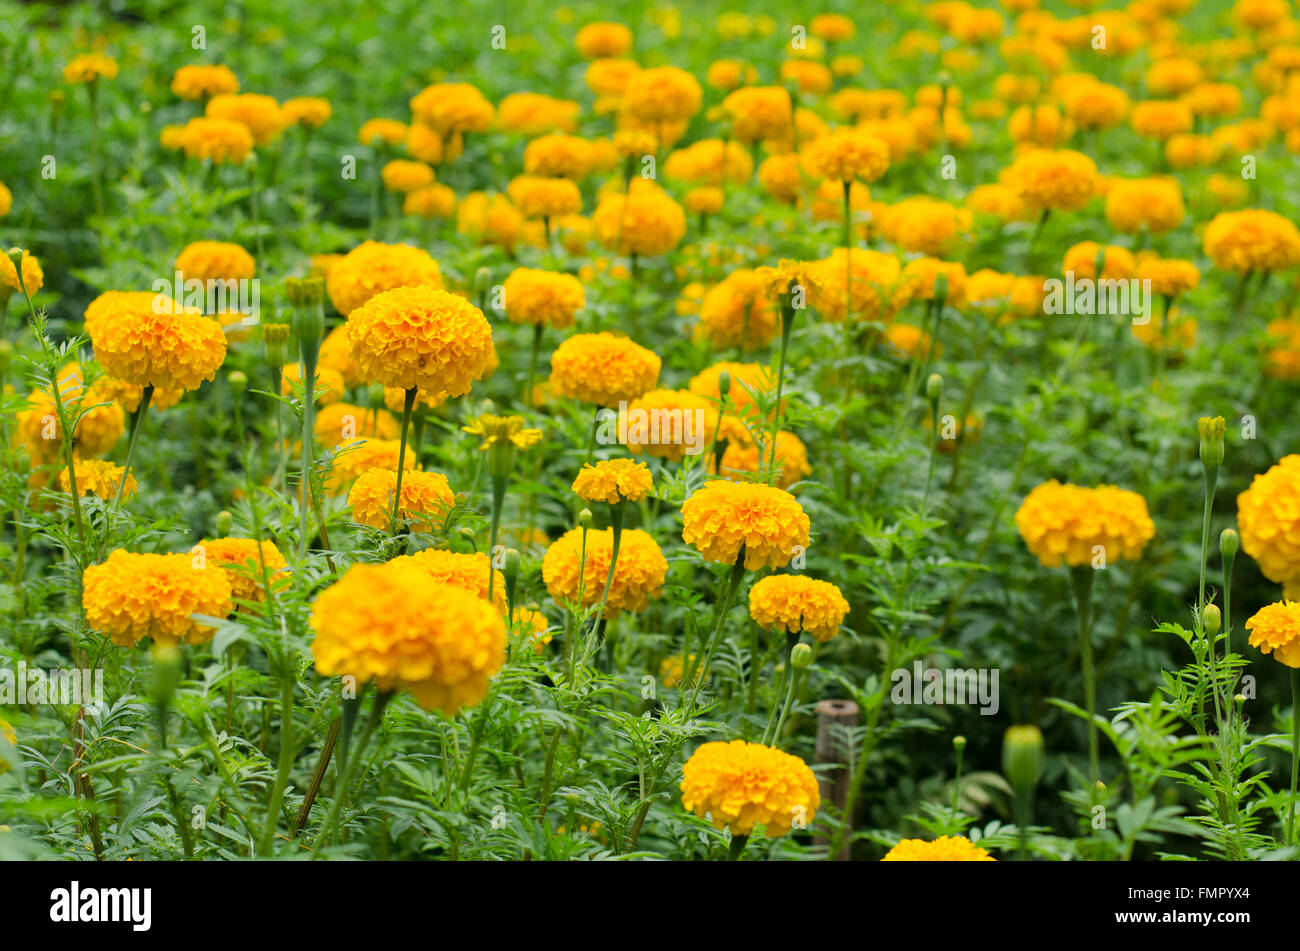 Yellow marigolds blooming in the garden Stock Photo